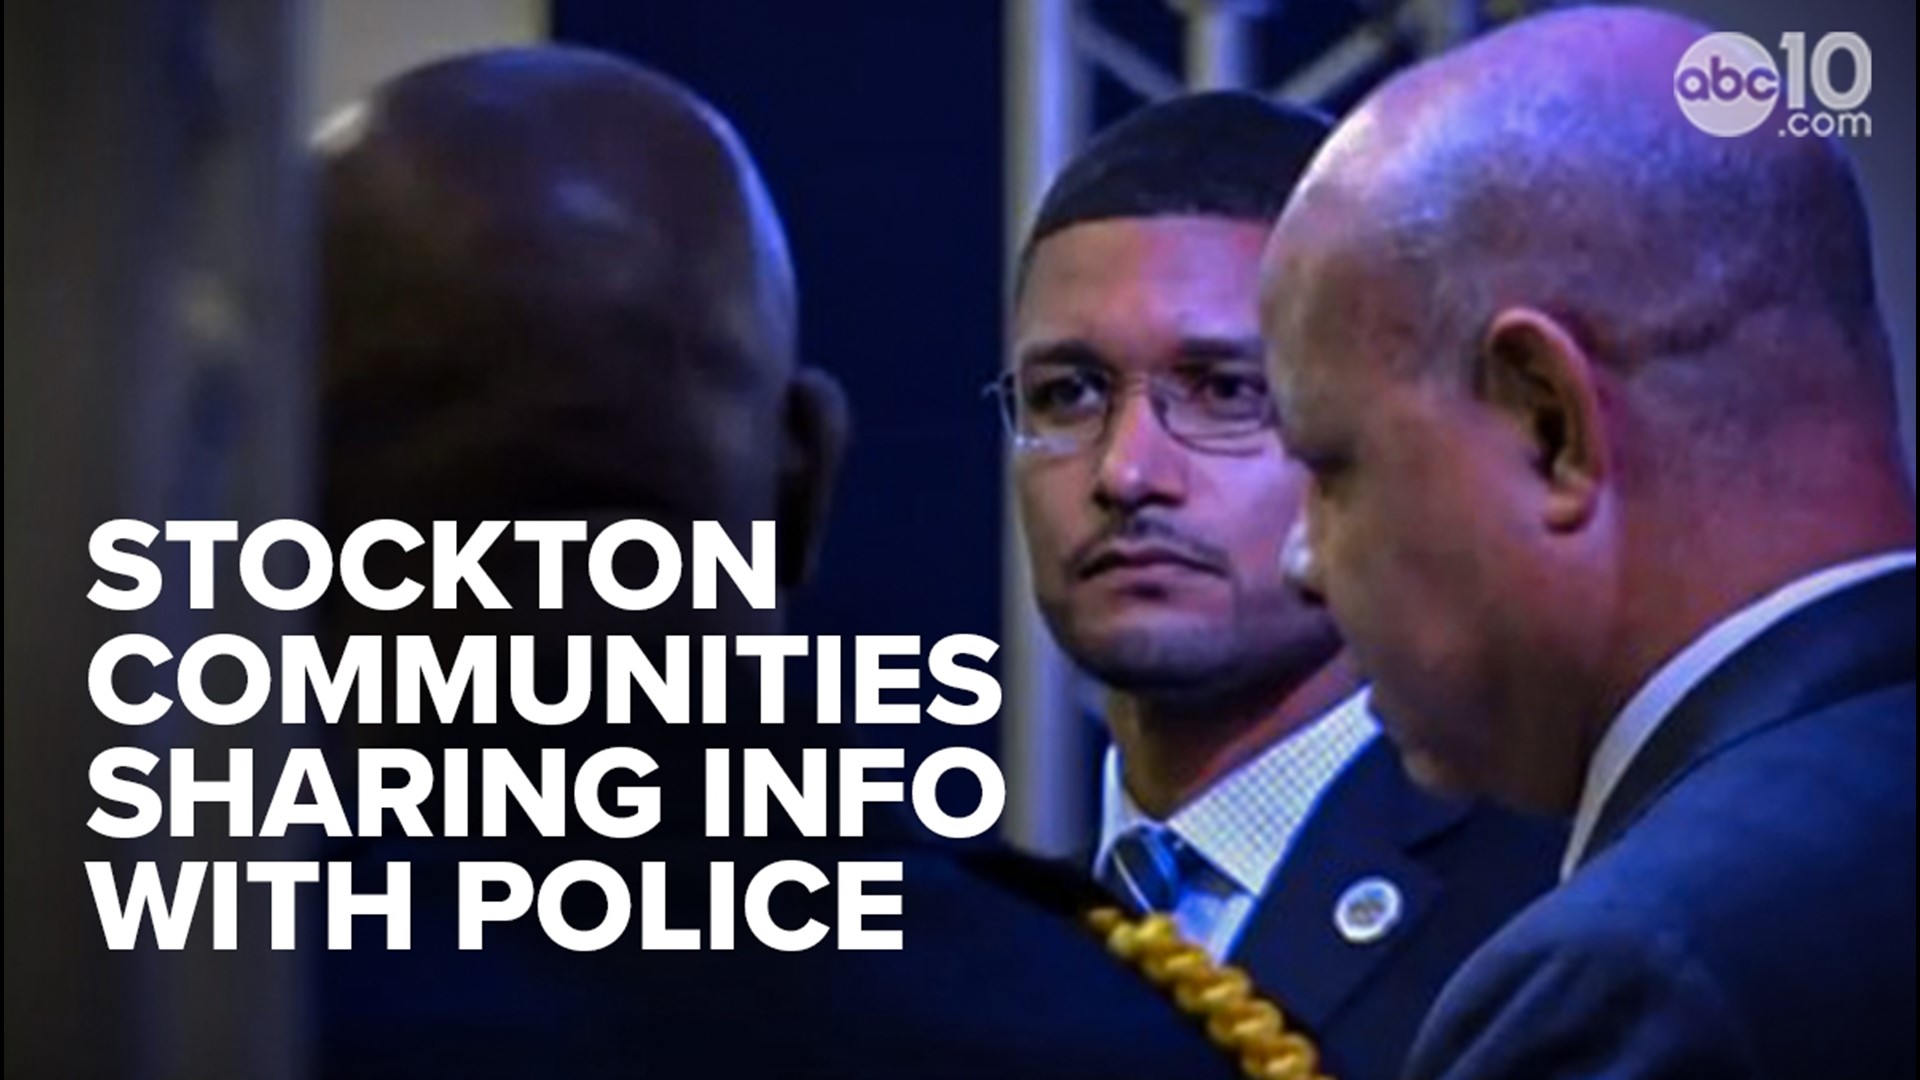 Community leaders in Stockton are asking residents to be more vocal when witnessing crime in the wake of a suspected serial killer operating in silence.